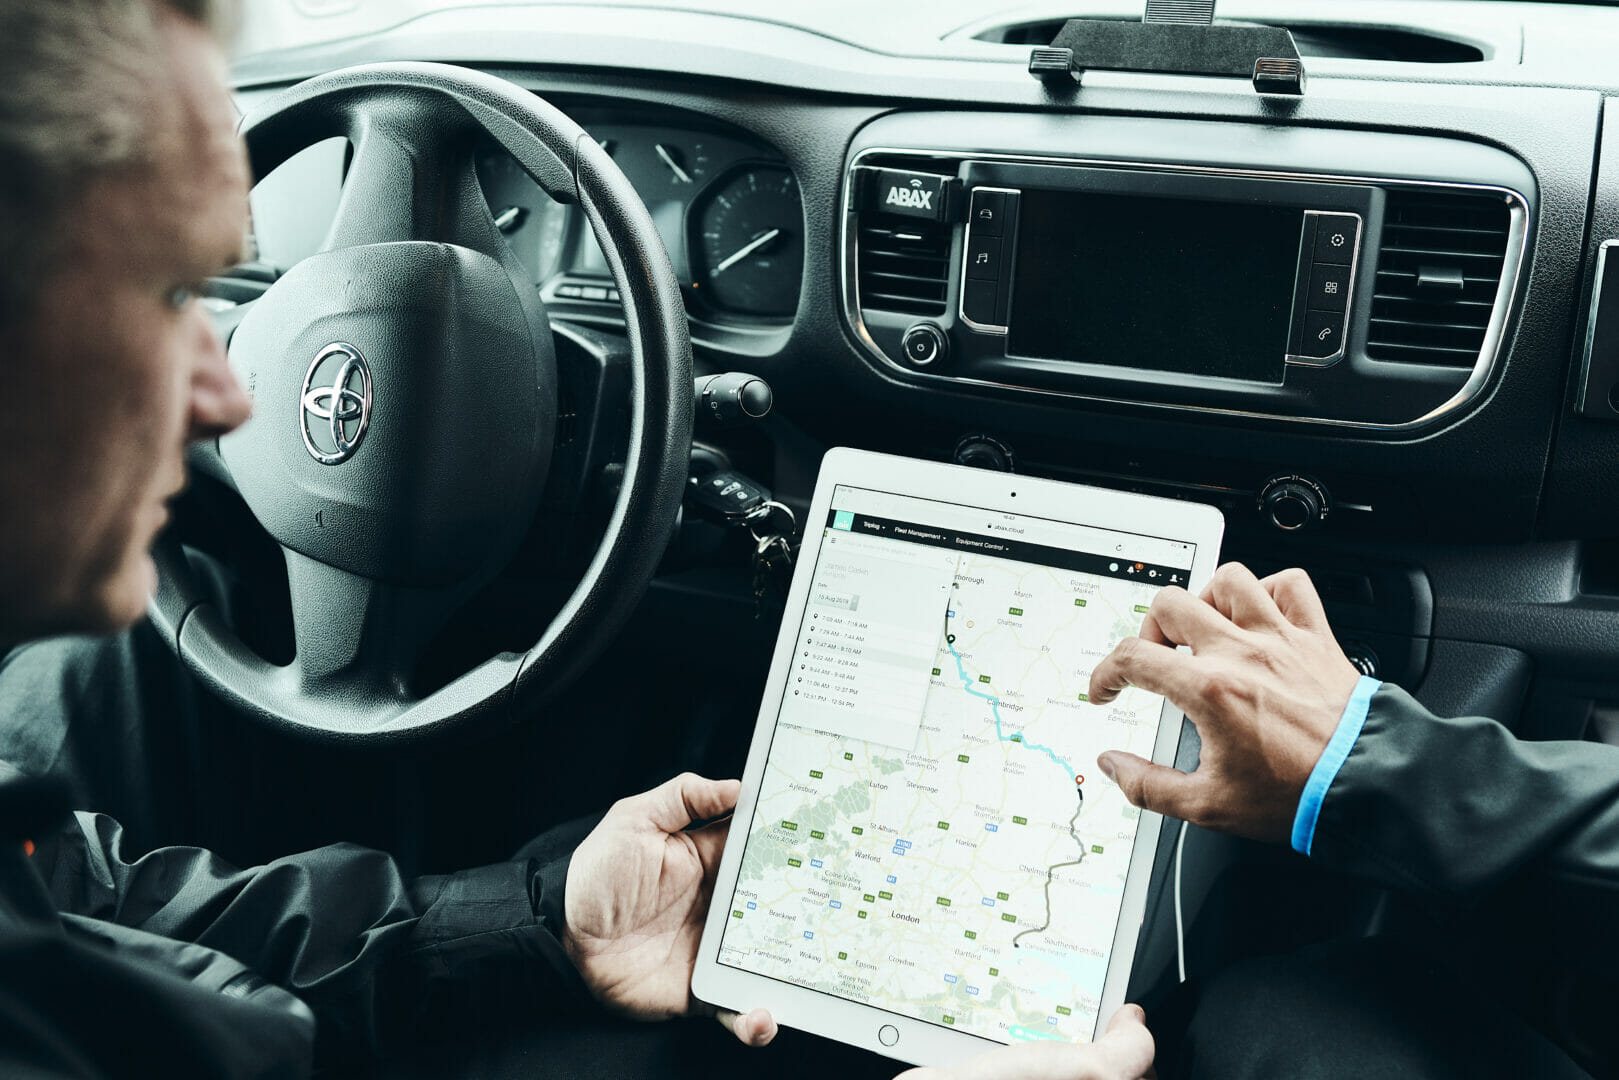 Remote fleet management made easy with innovative telematics solutions